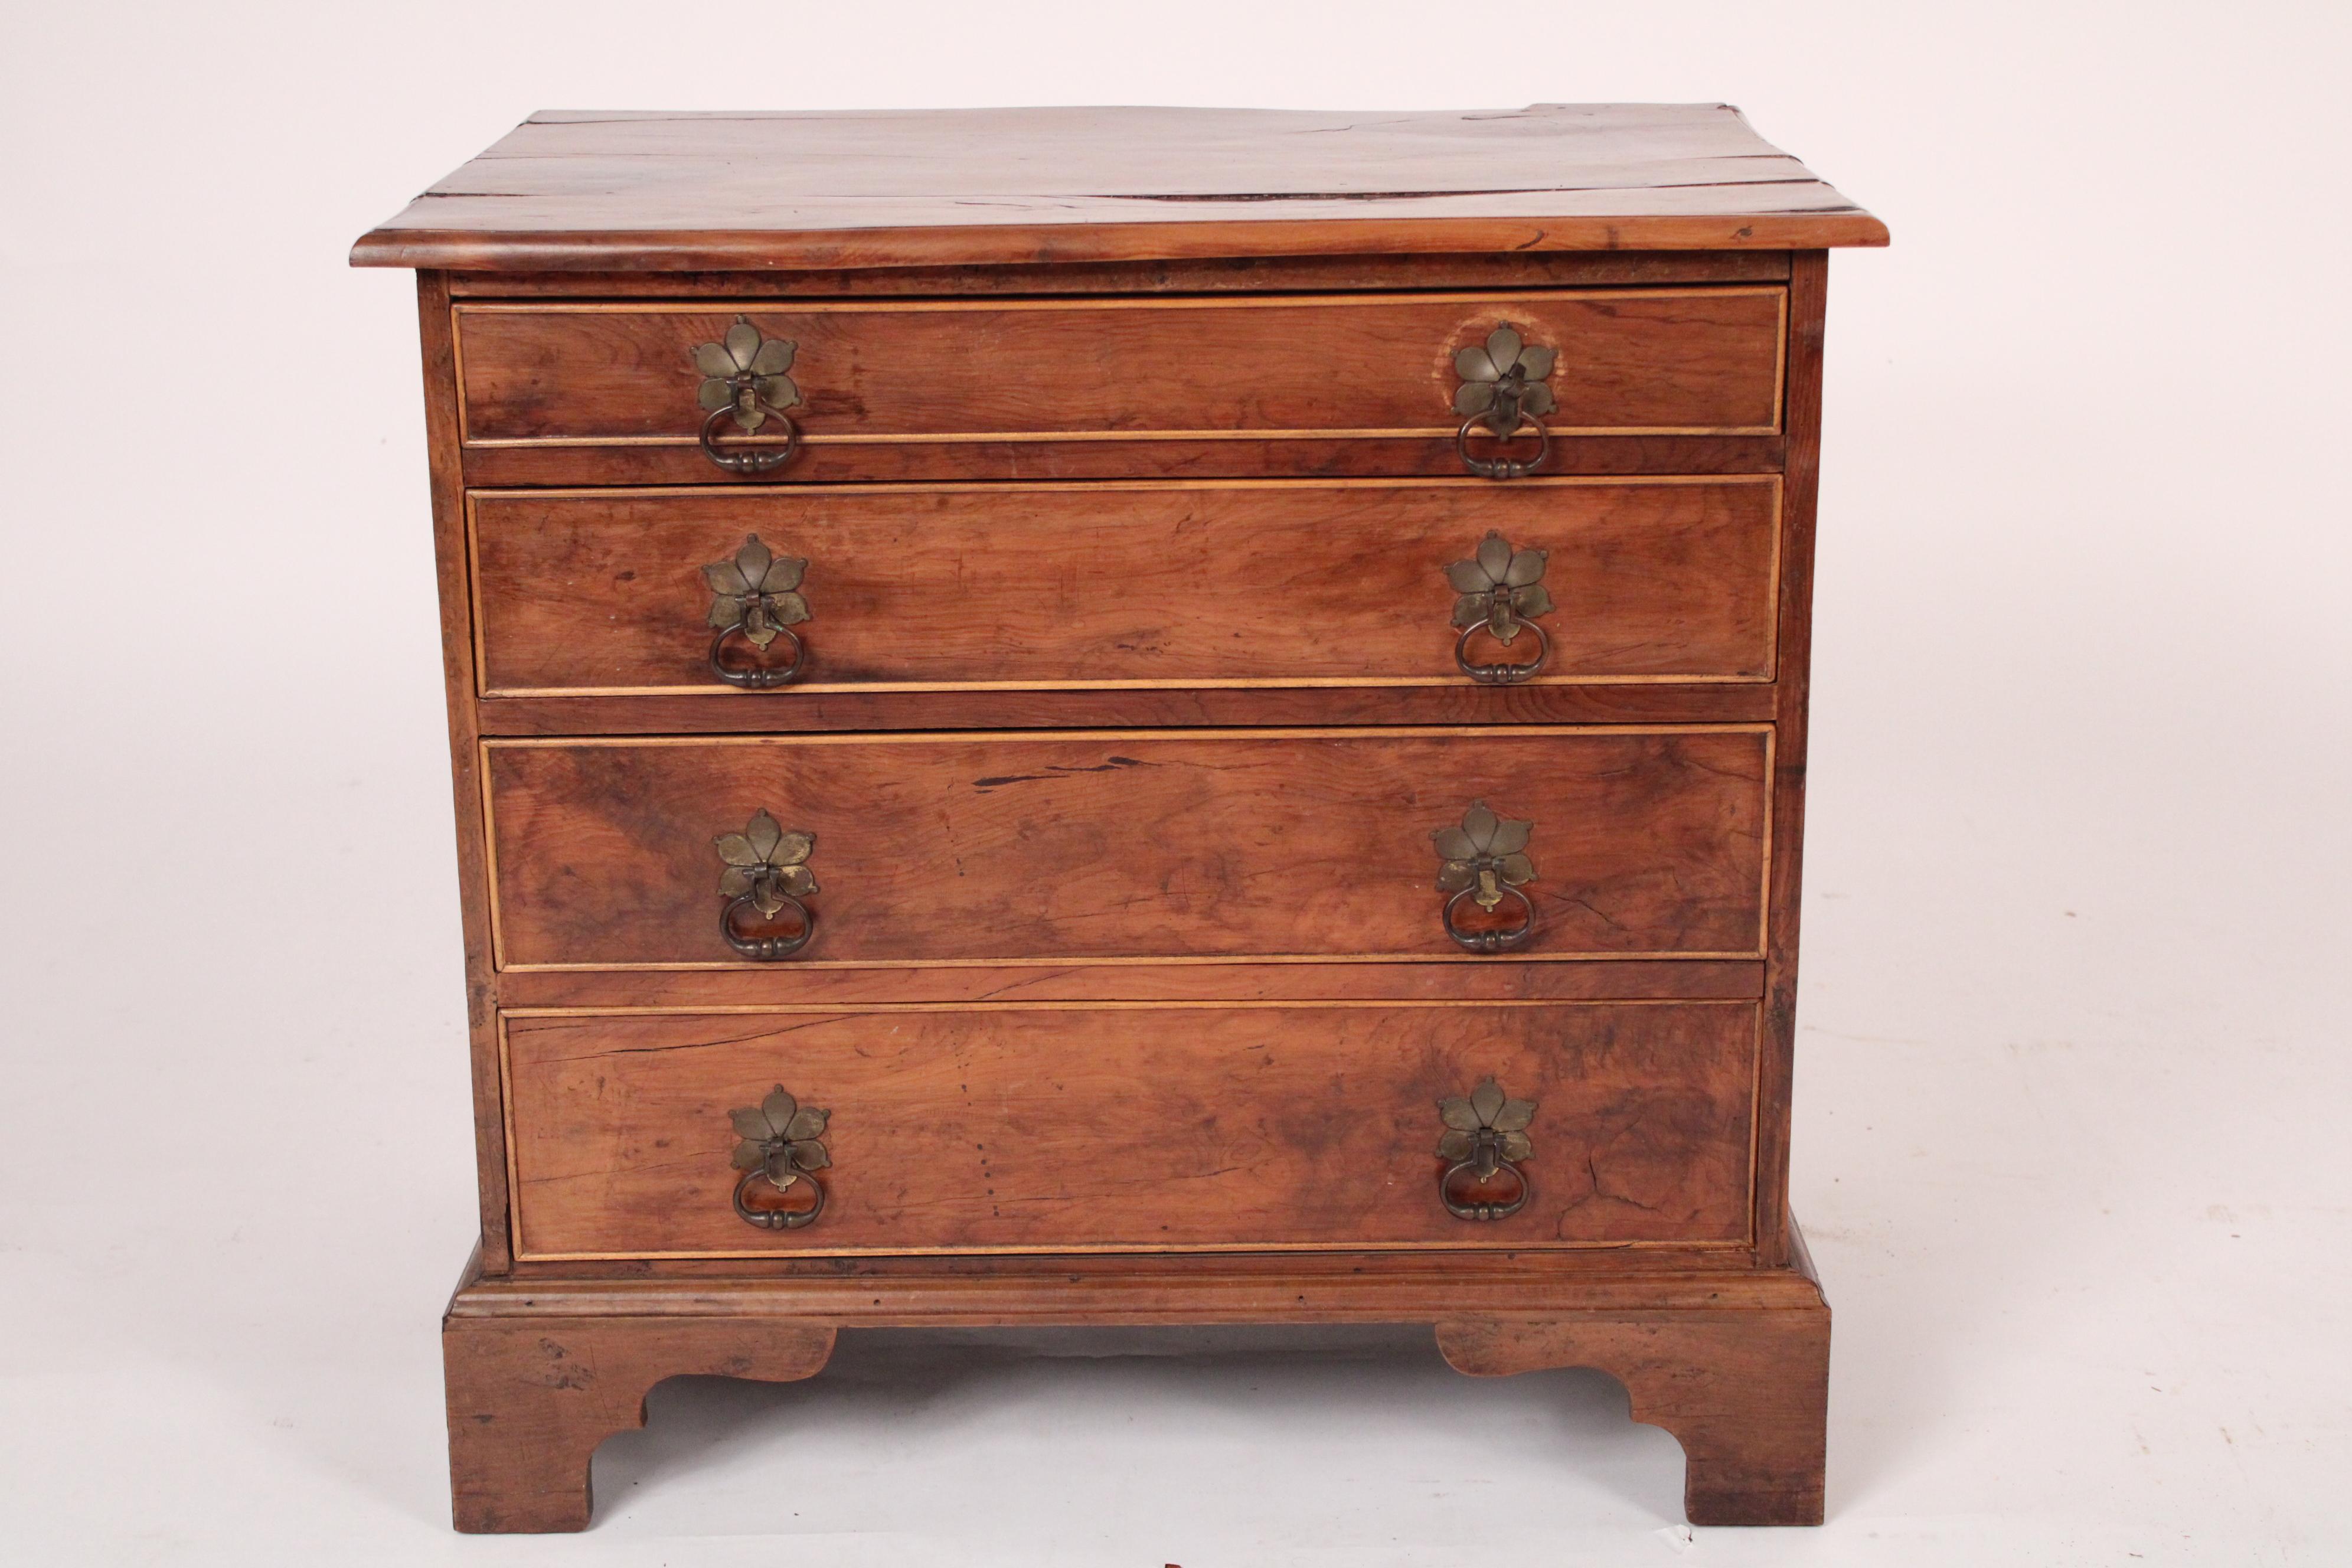 Antique George III style yew wood chest of drawers, circa 1900. With a rectangular yew wood top with molded front and side edges, 4 graduated drawers with brass pulls, resting on bracket feet. The yew wood has excellent old color. Hand dove tailed